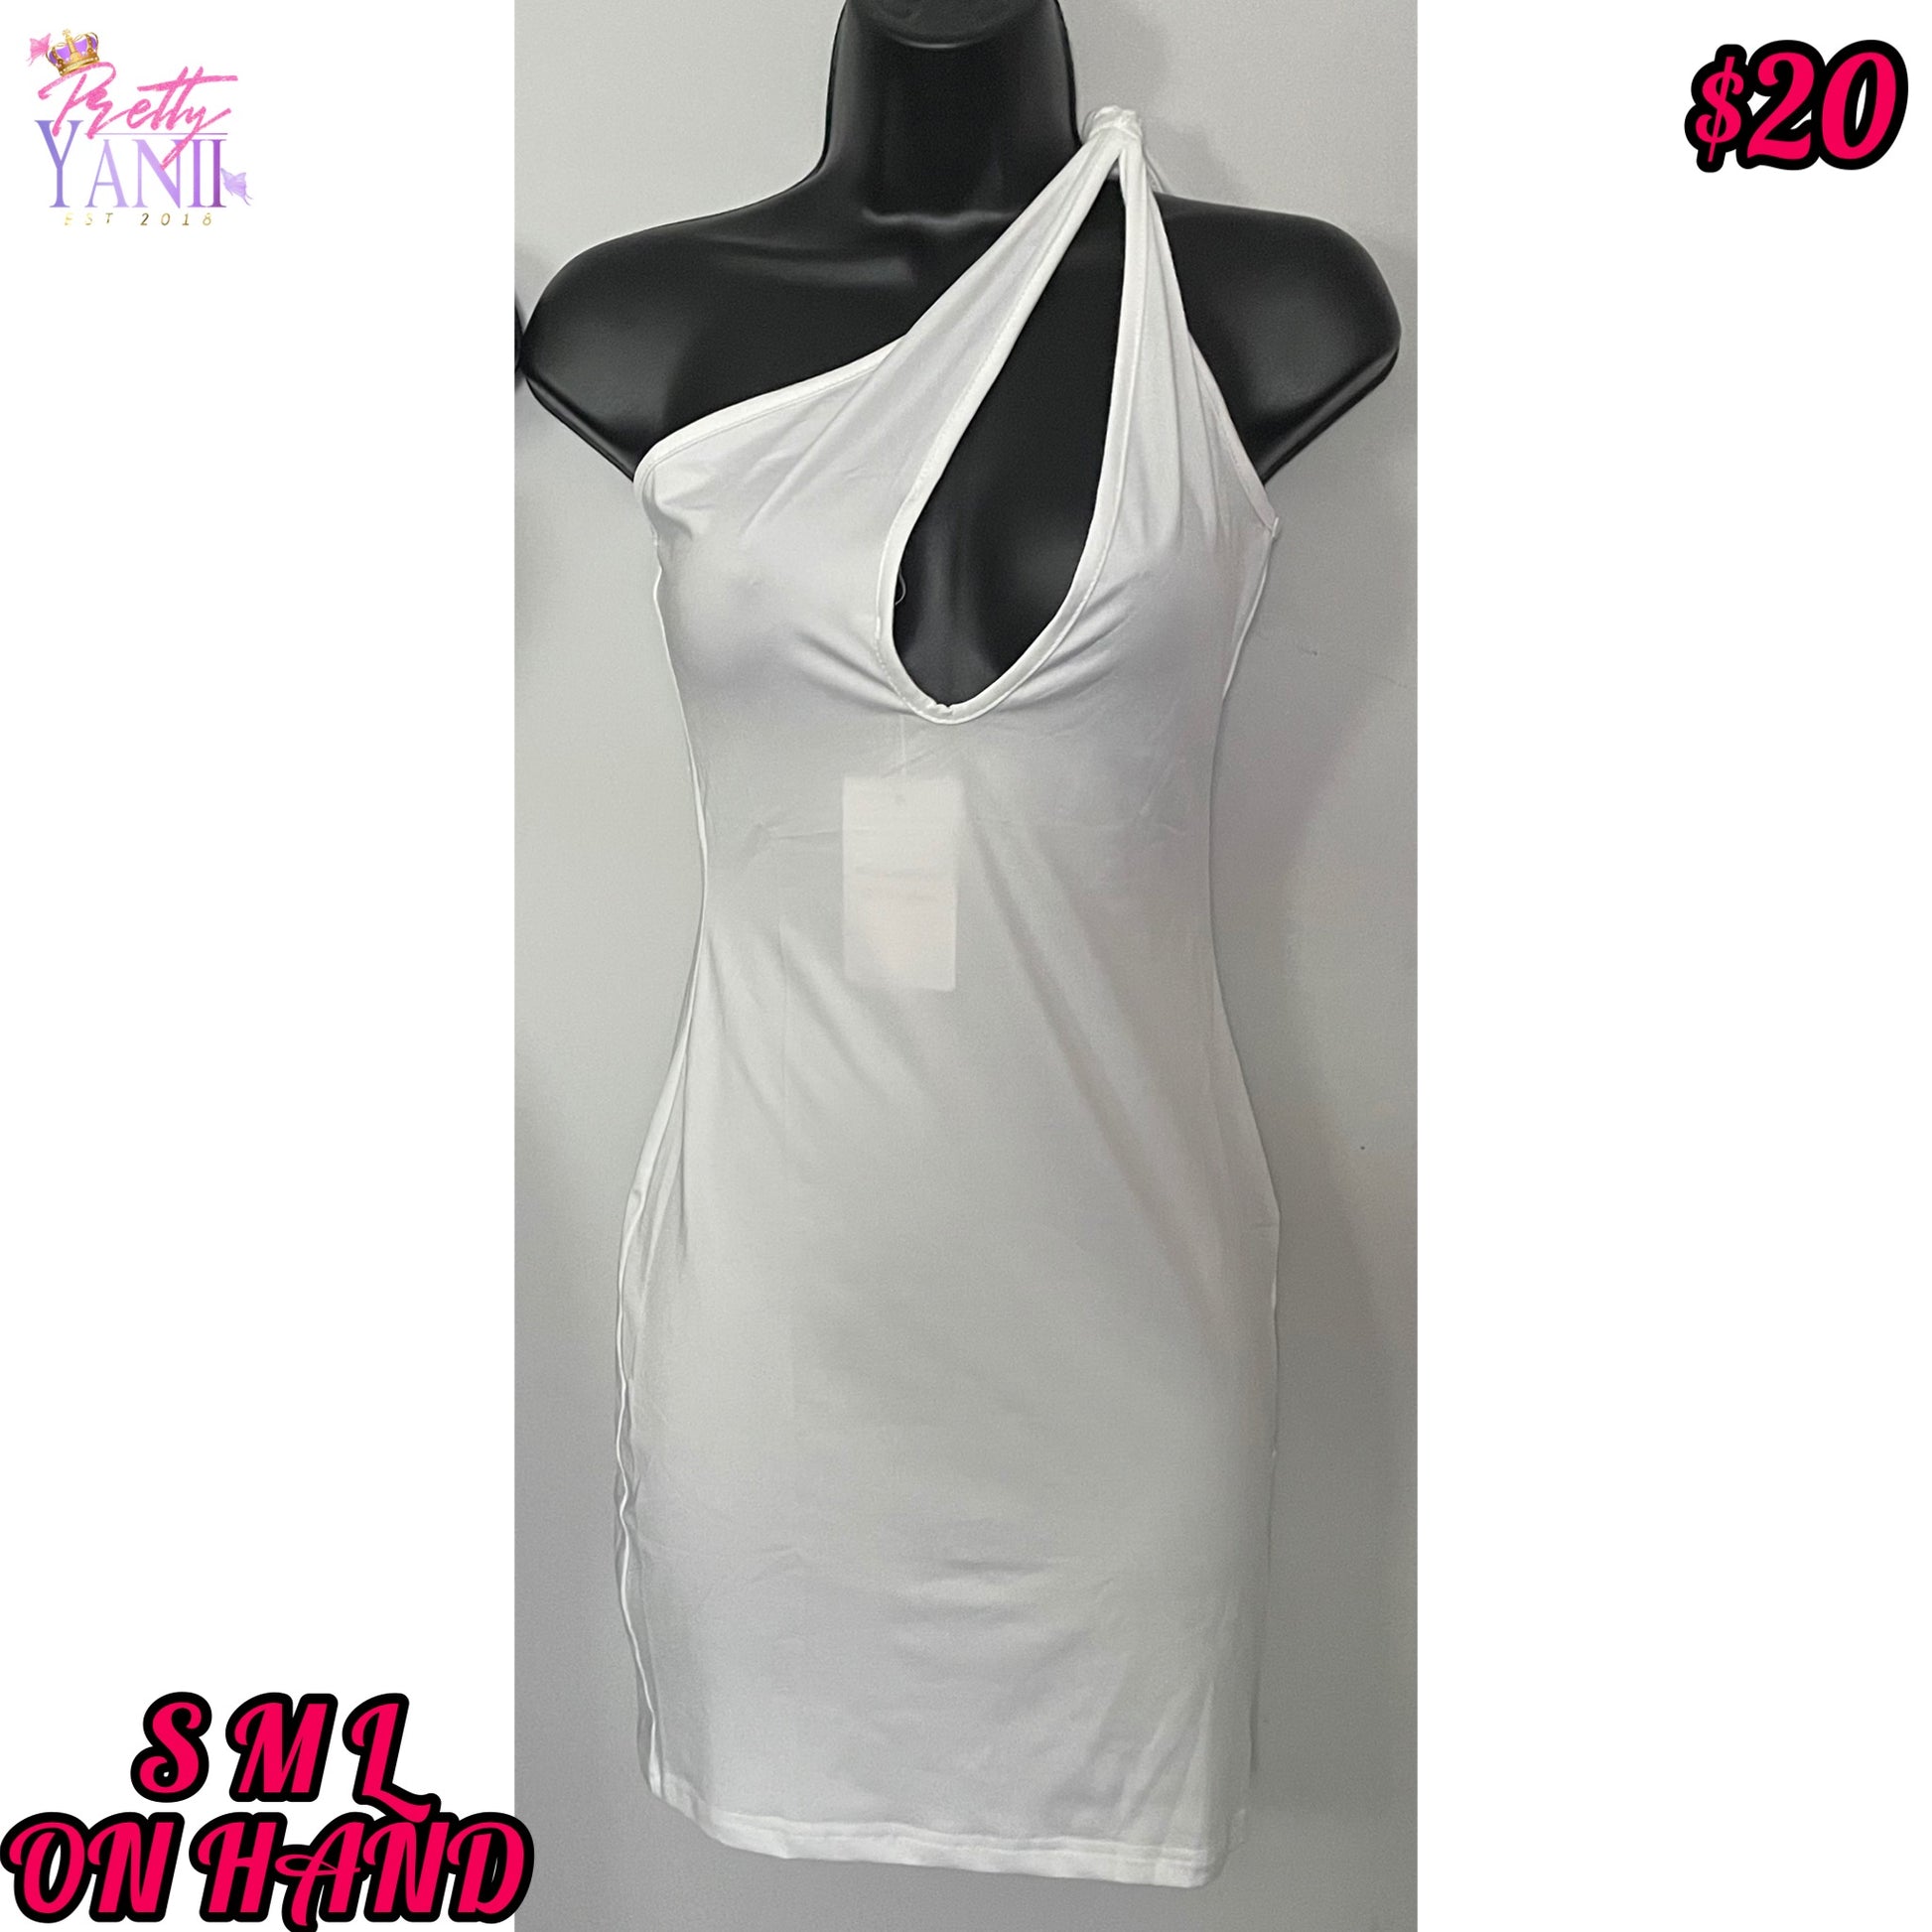 body-con dress, available in white, features a stretchable material